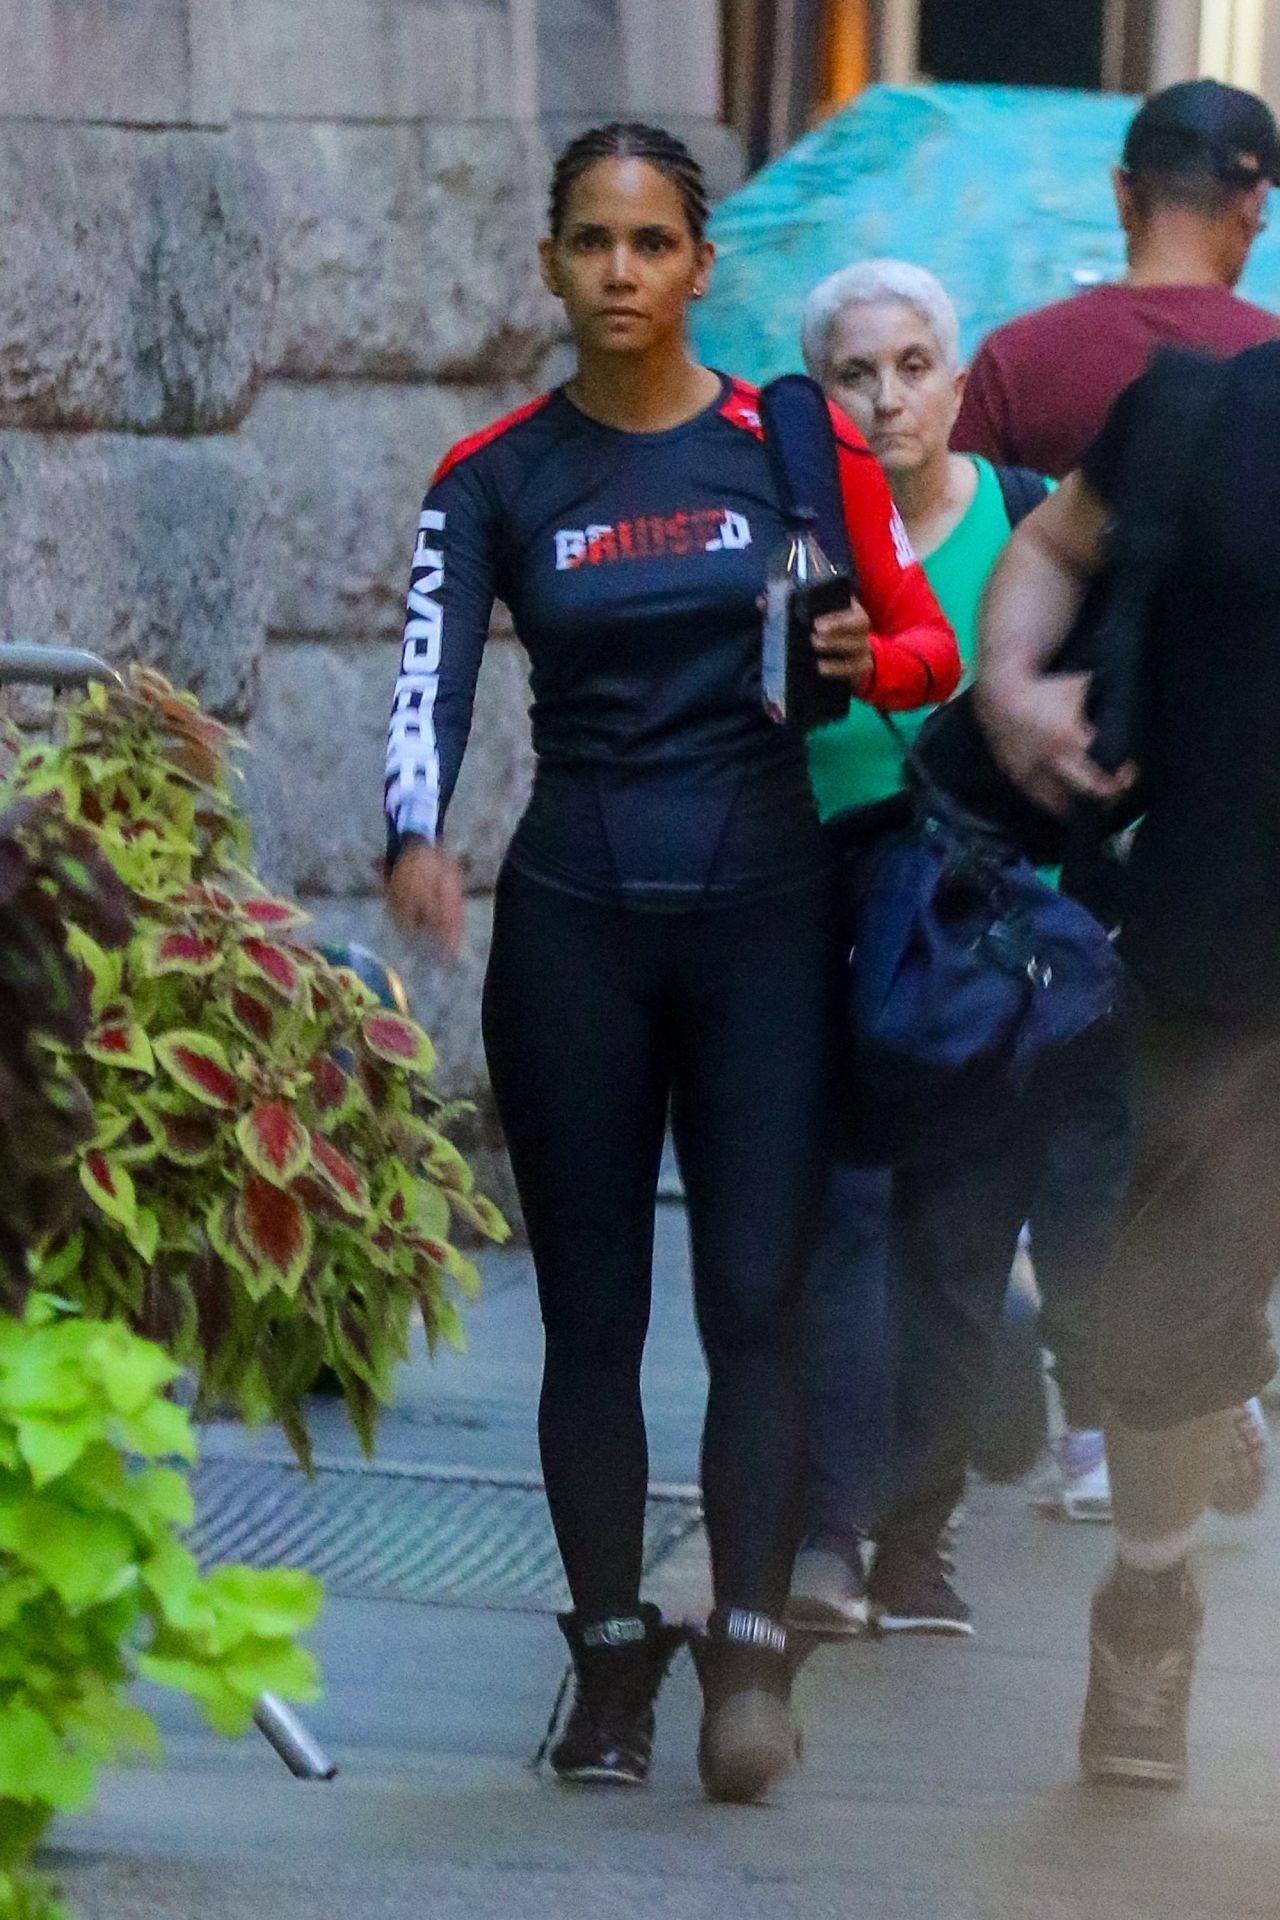 halle-berry-in-skintight-workout-gear-10-08-2019-8.jpg